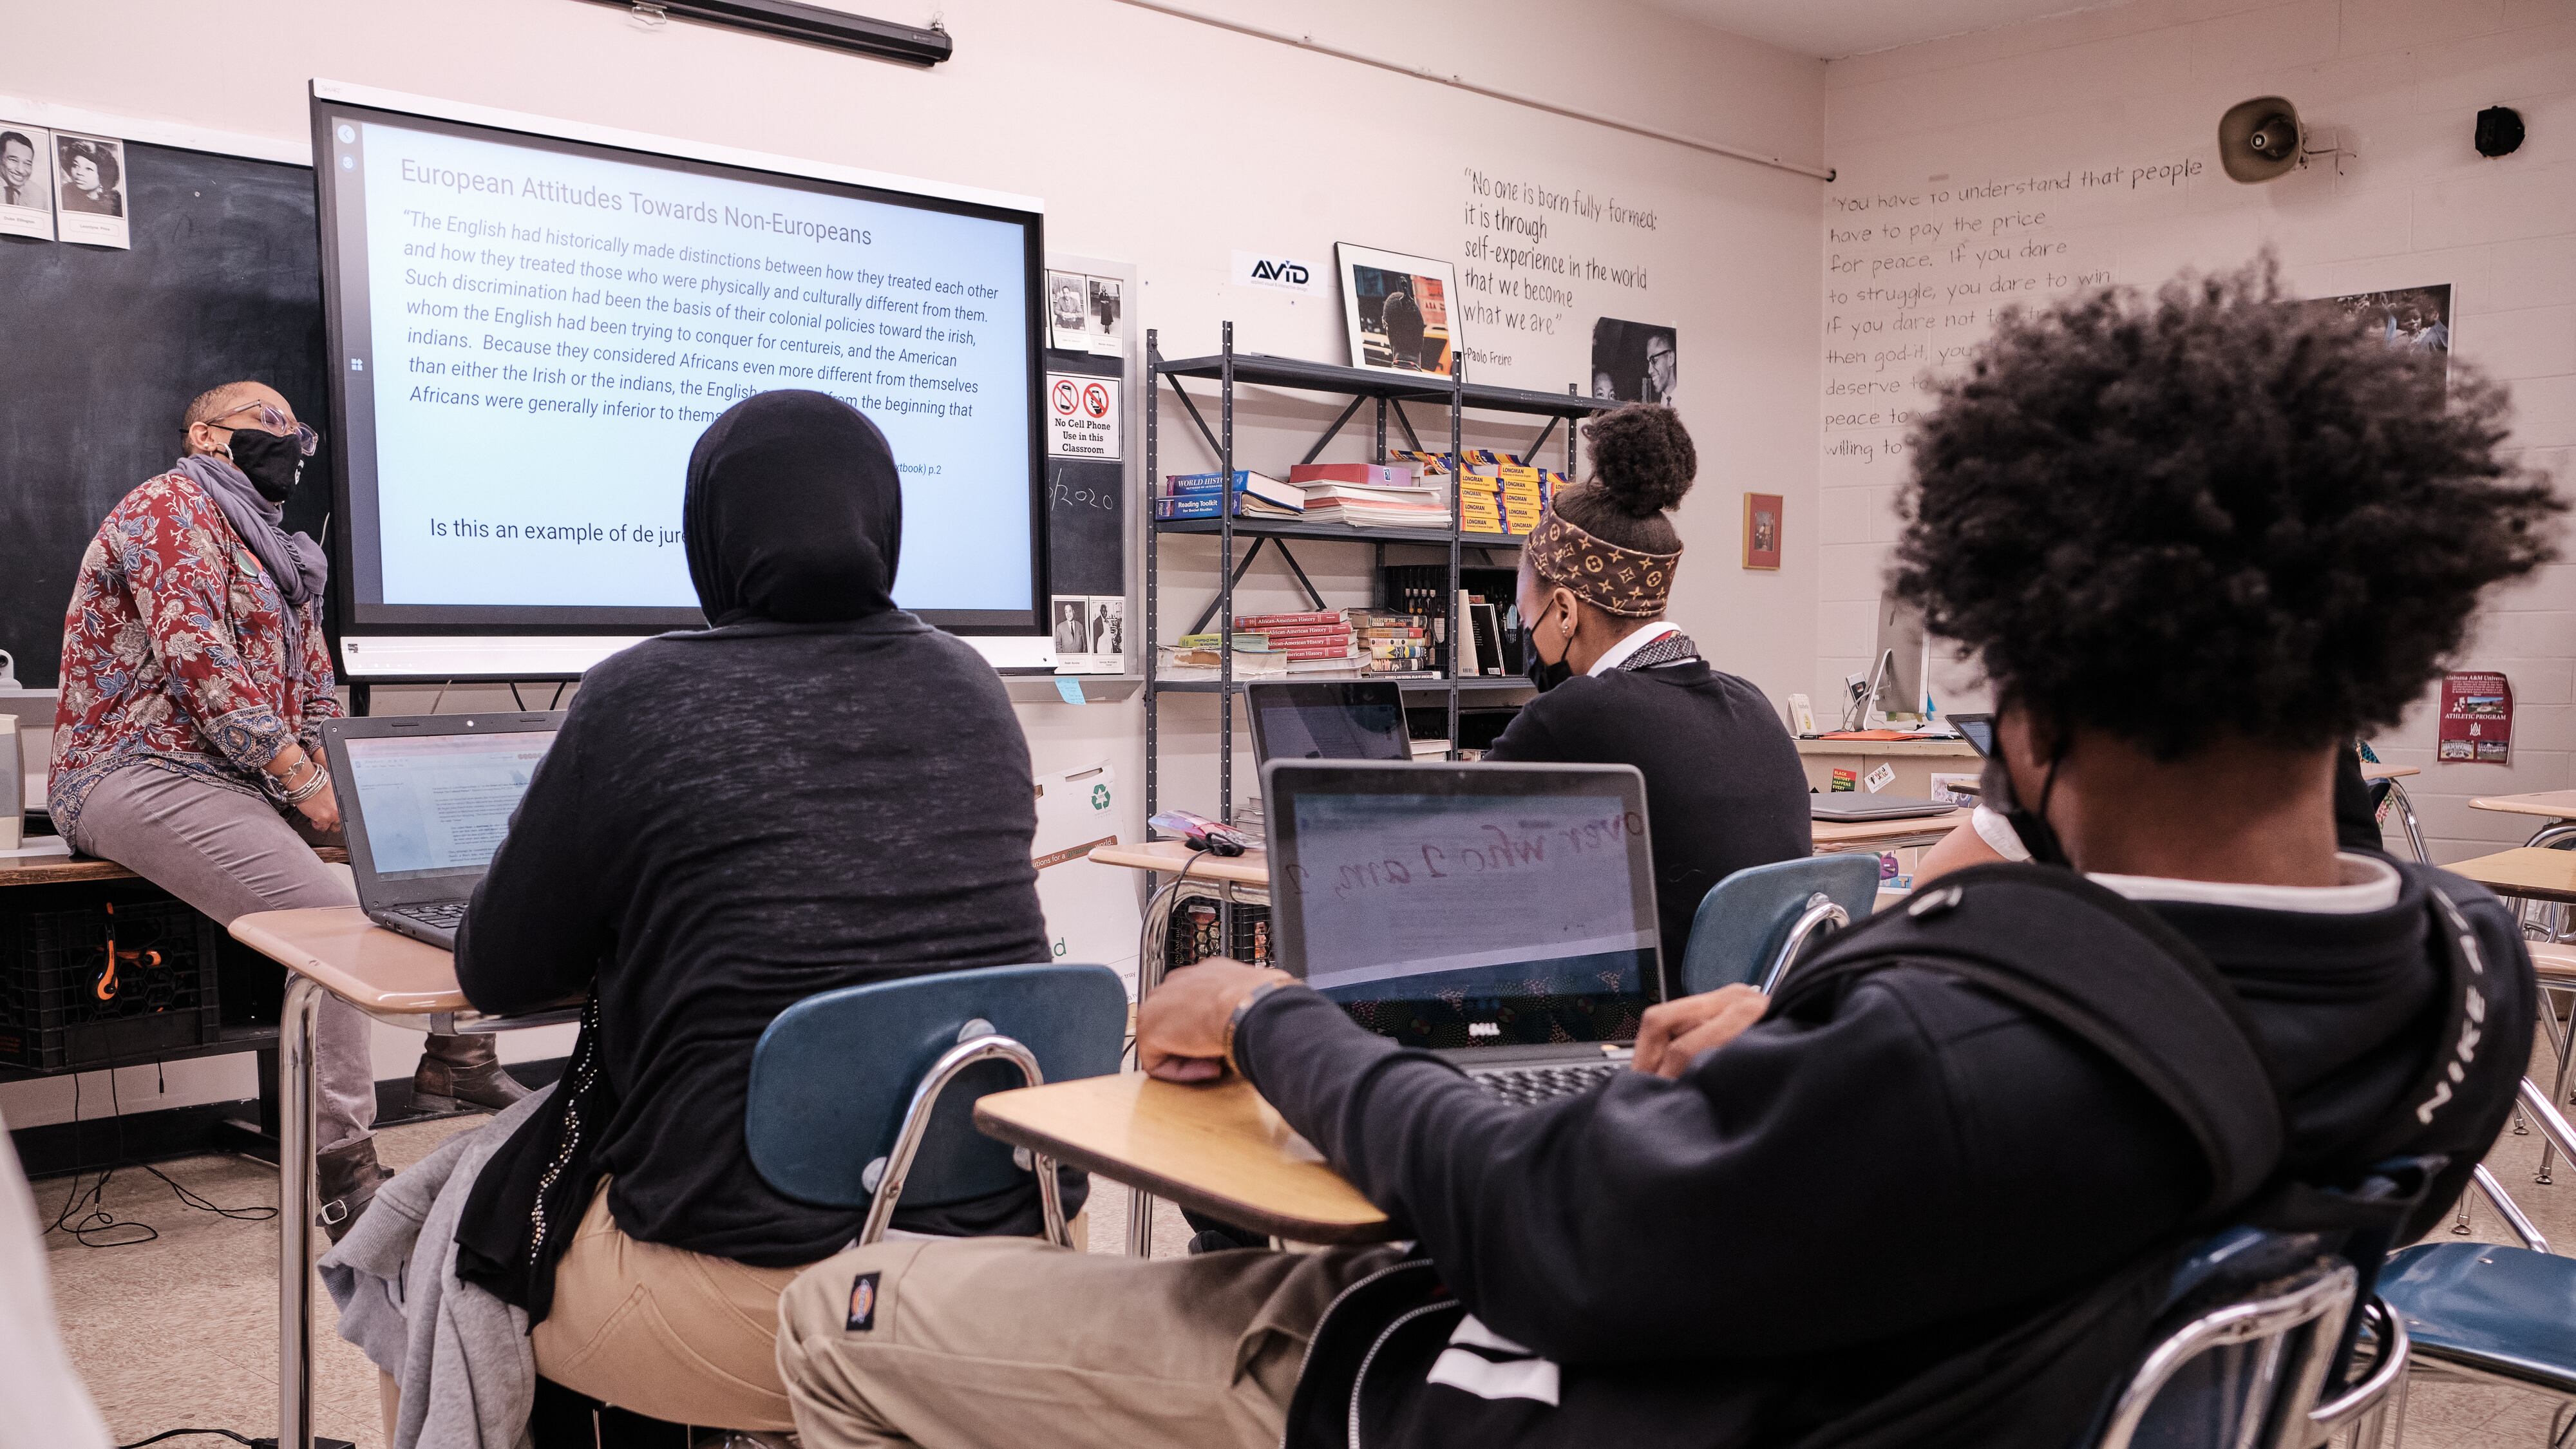 A woman wearing a black face mask and glasses sits on a table in front of several students in a classroom. To her left is a projector screen that reads “European Attitudes Towards Non-Europeans.”